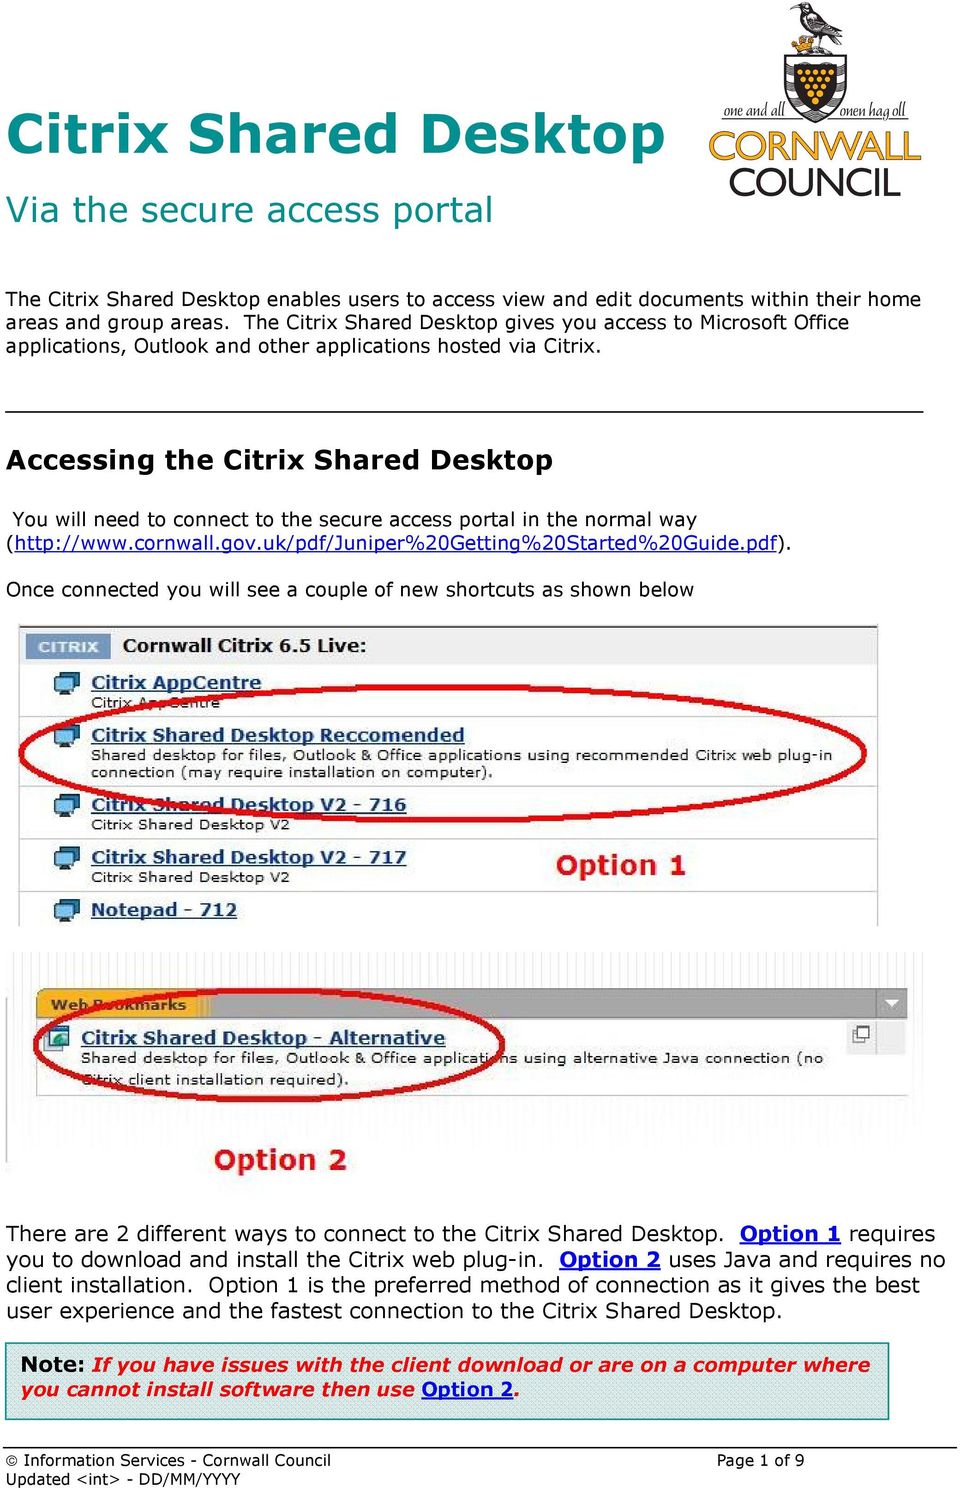 Accessing the Citrix Shared Desktop You will need to connect to the secure access portal in the normal way (http://www.cornwall.gov.uk/pdf/juniper%20getting%20started%20guide.pdf).